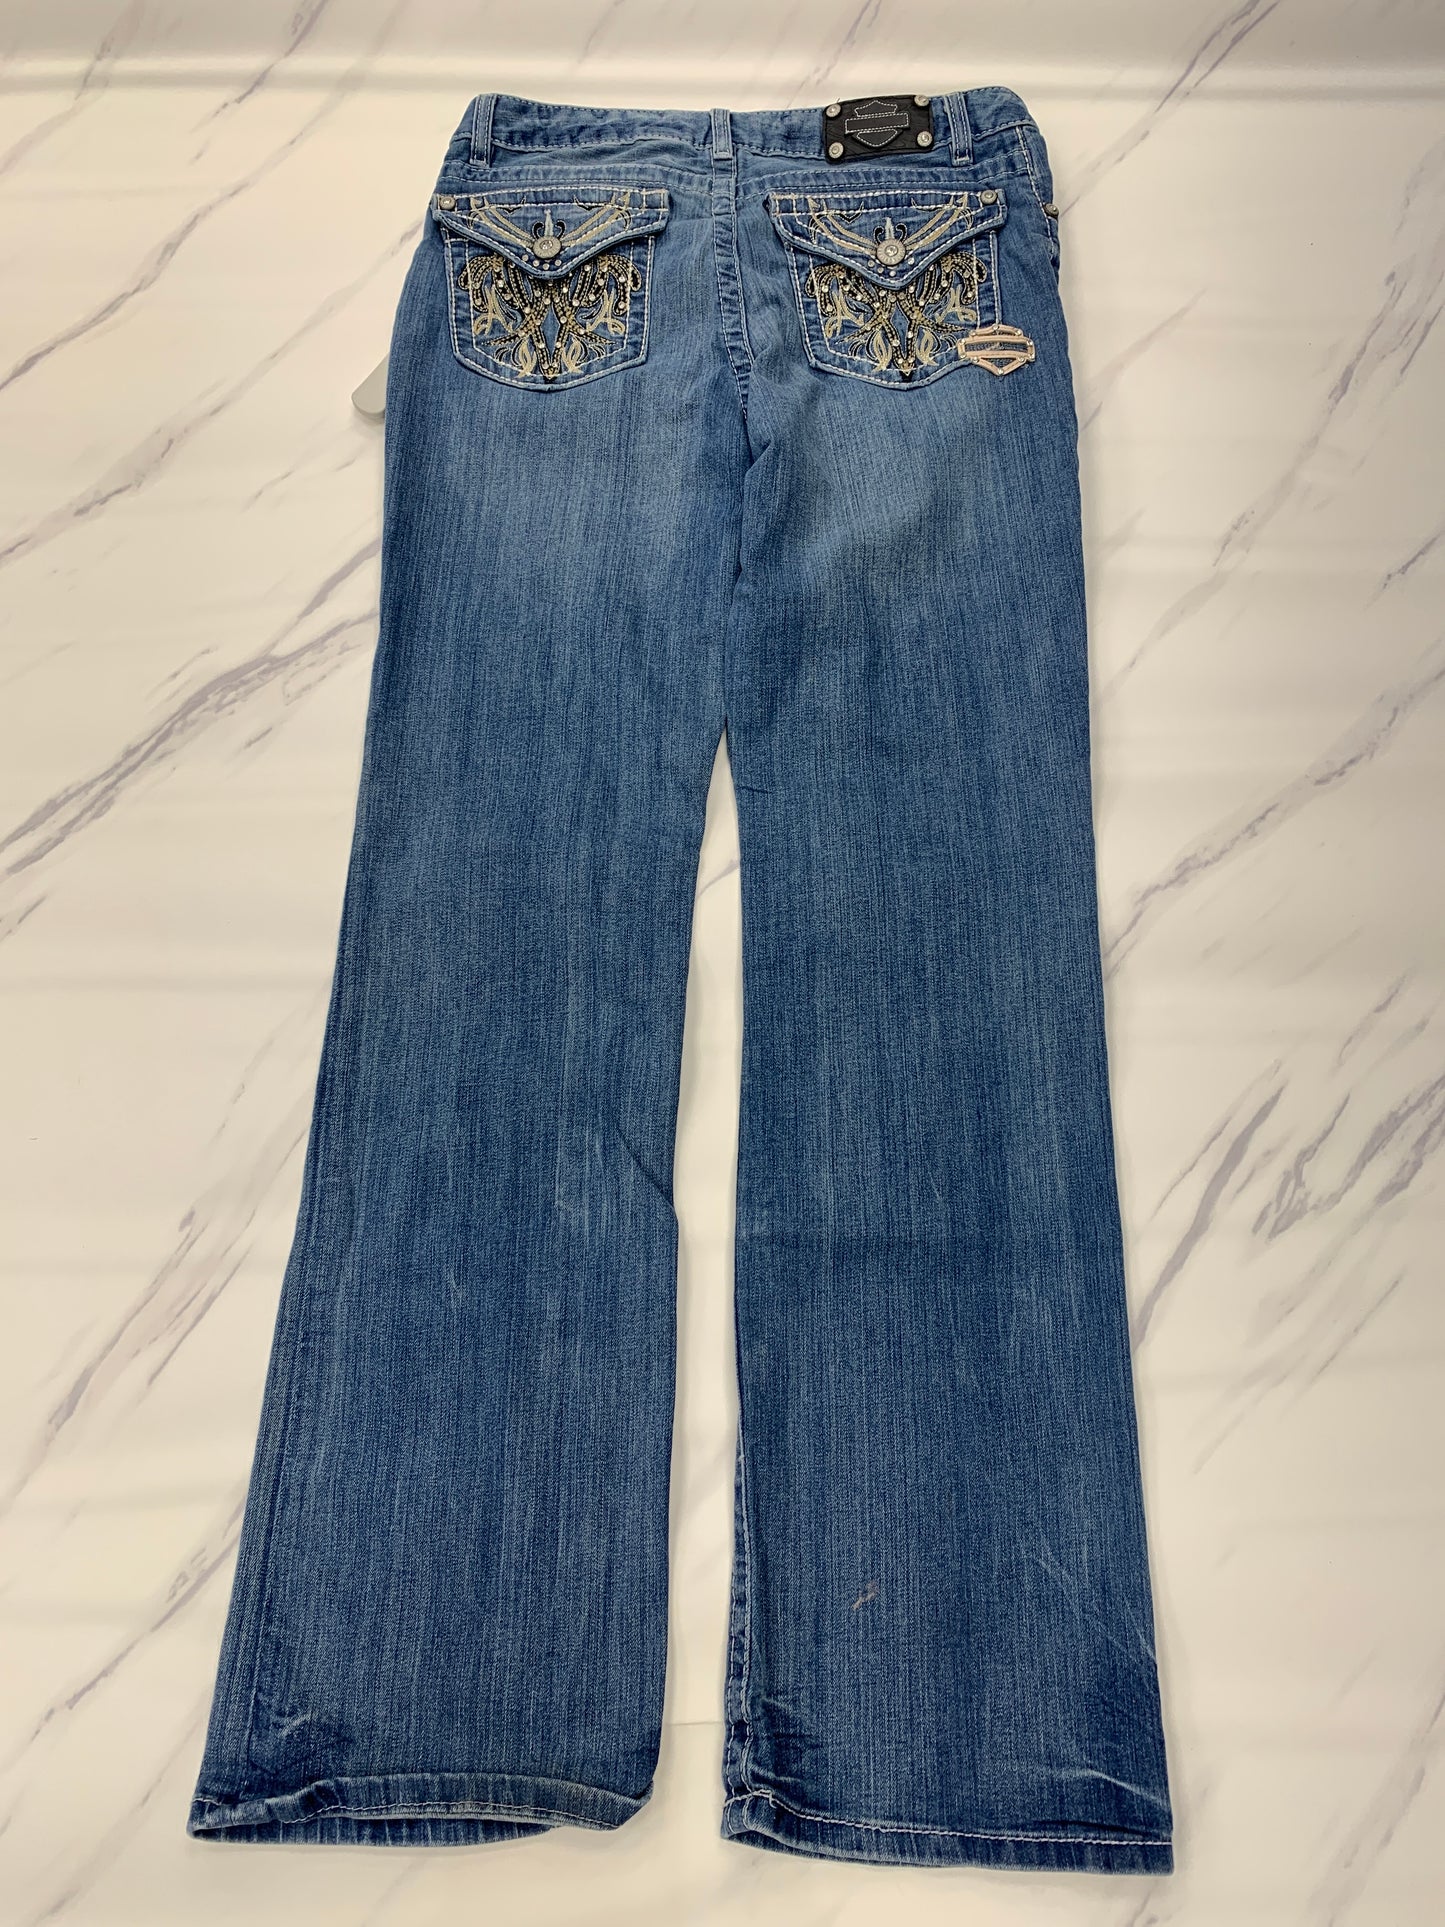 Jeans Boot Cut By Harley Davidson  Size: 12